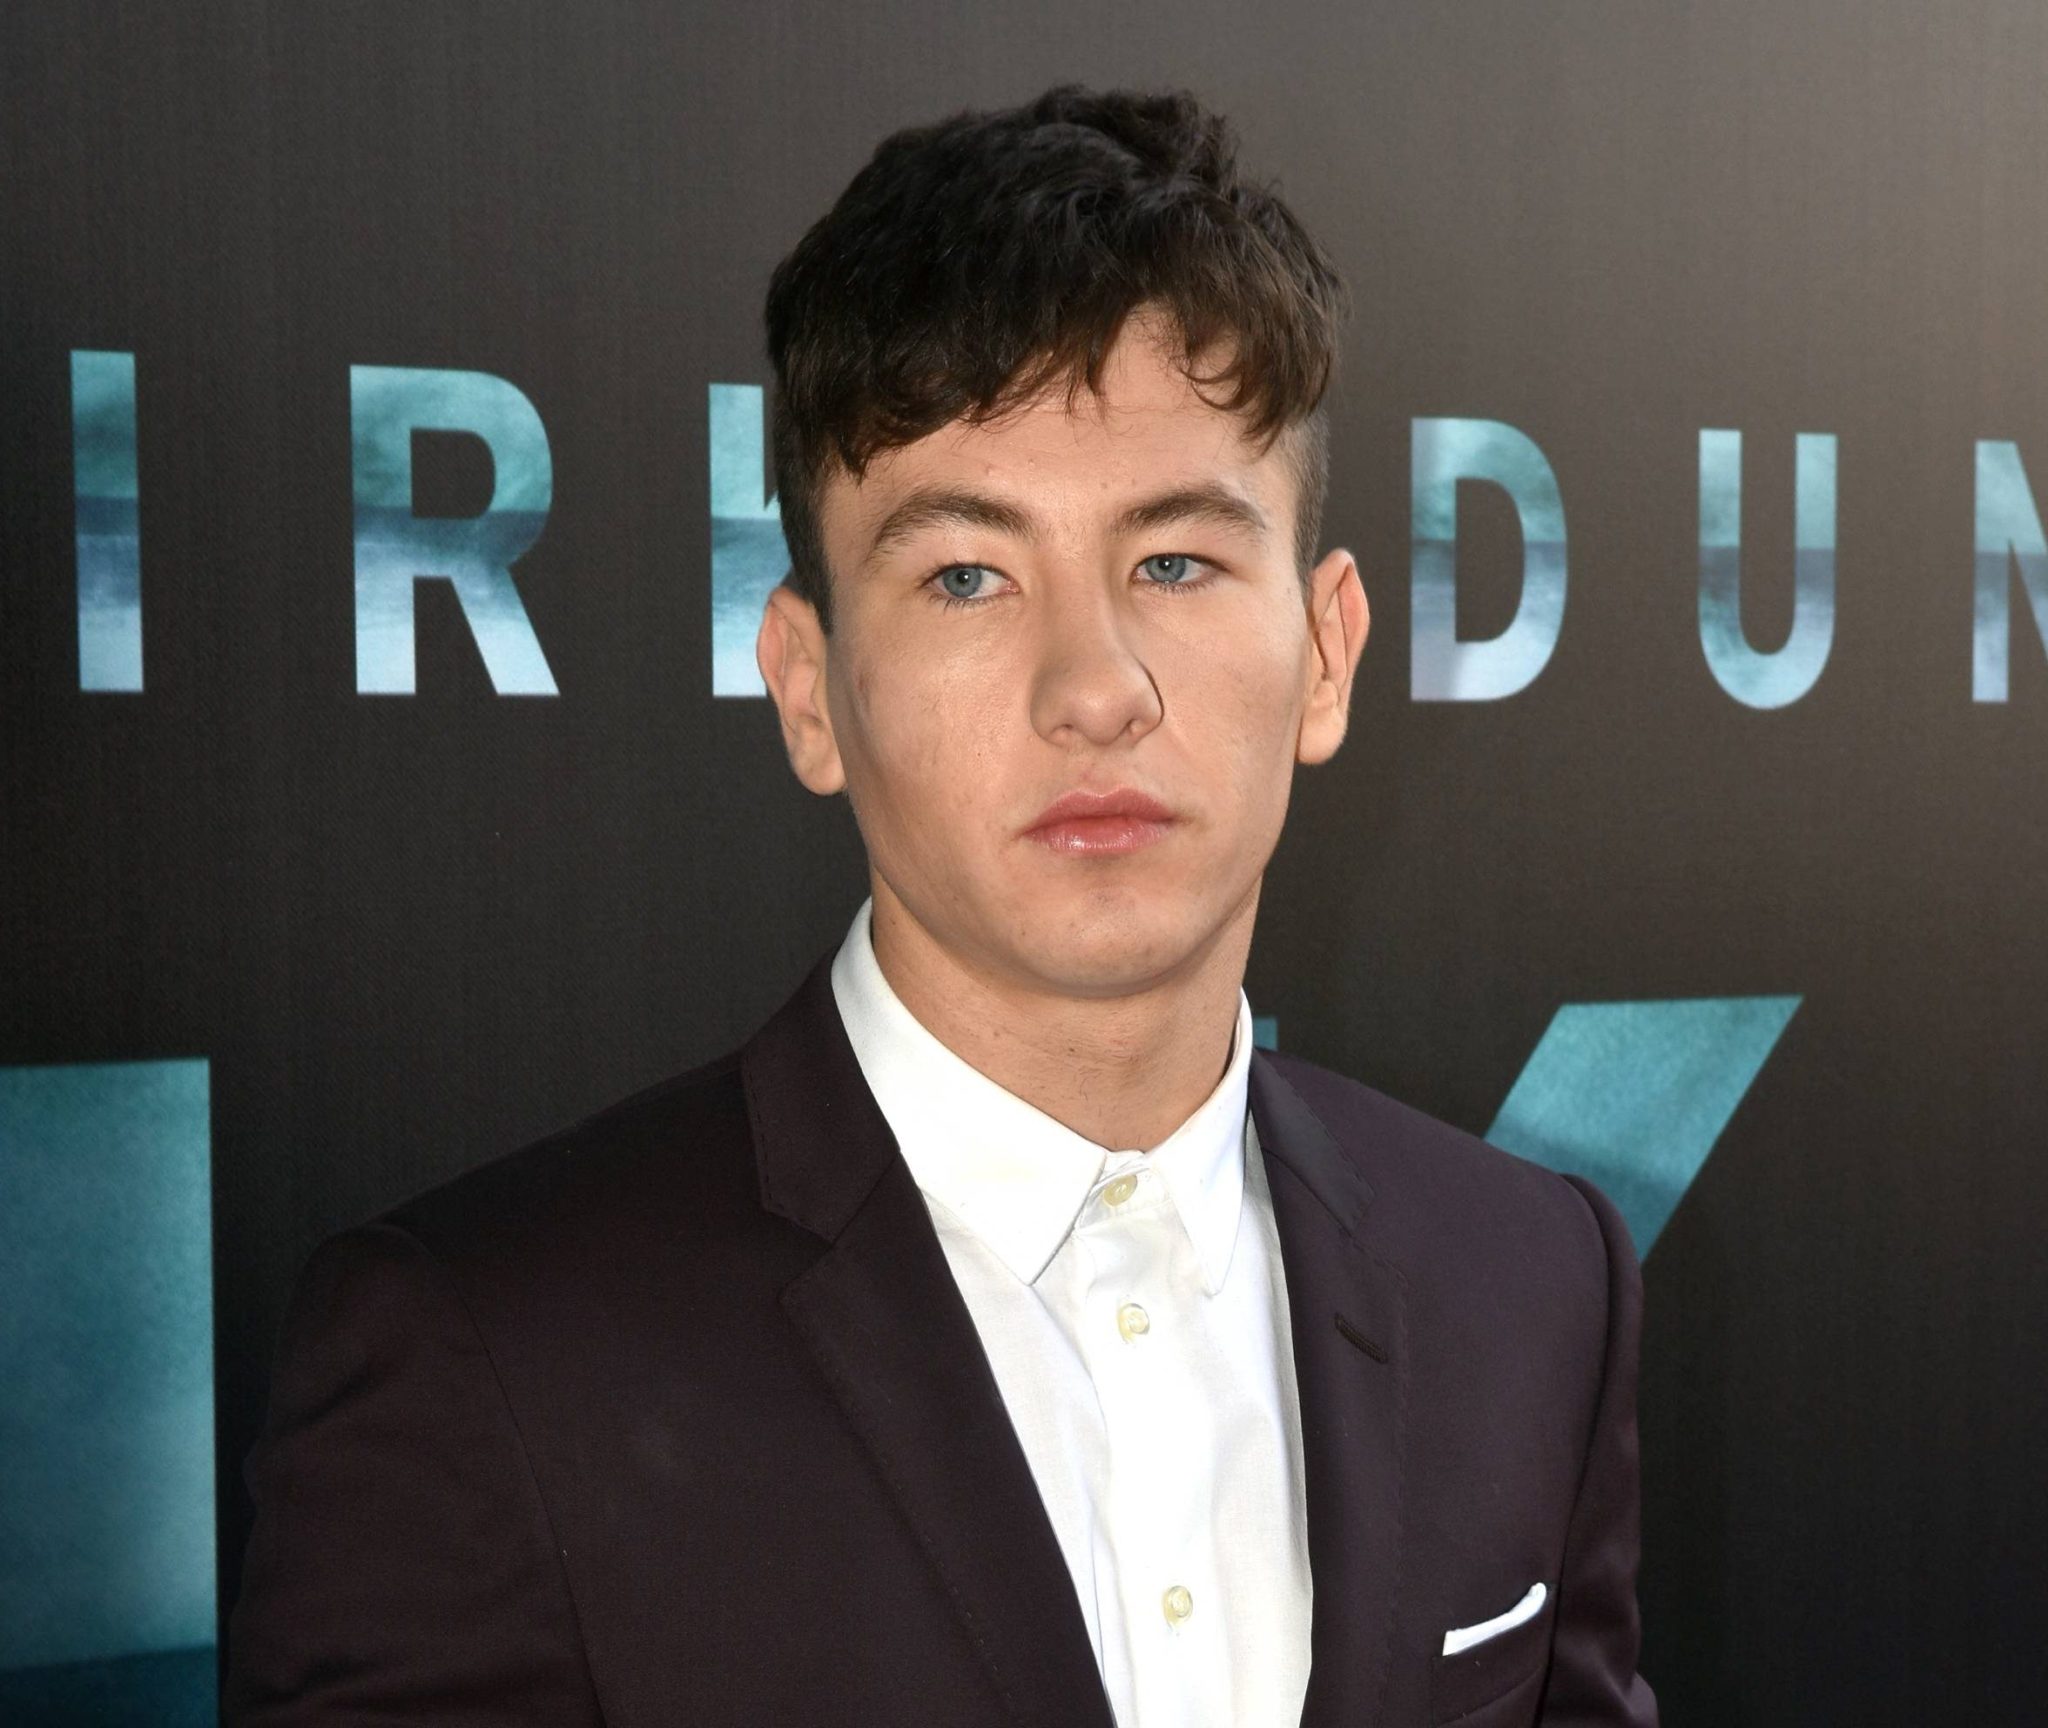 Barry Keoghan’s appearance in new Batman movie hints he’s landed major